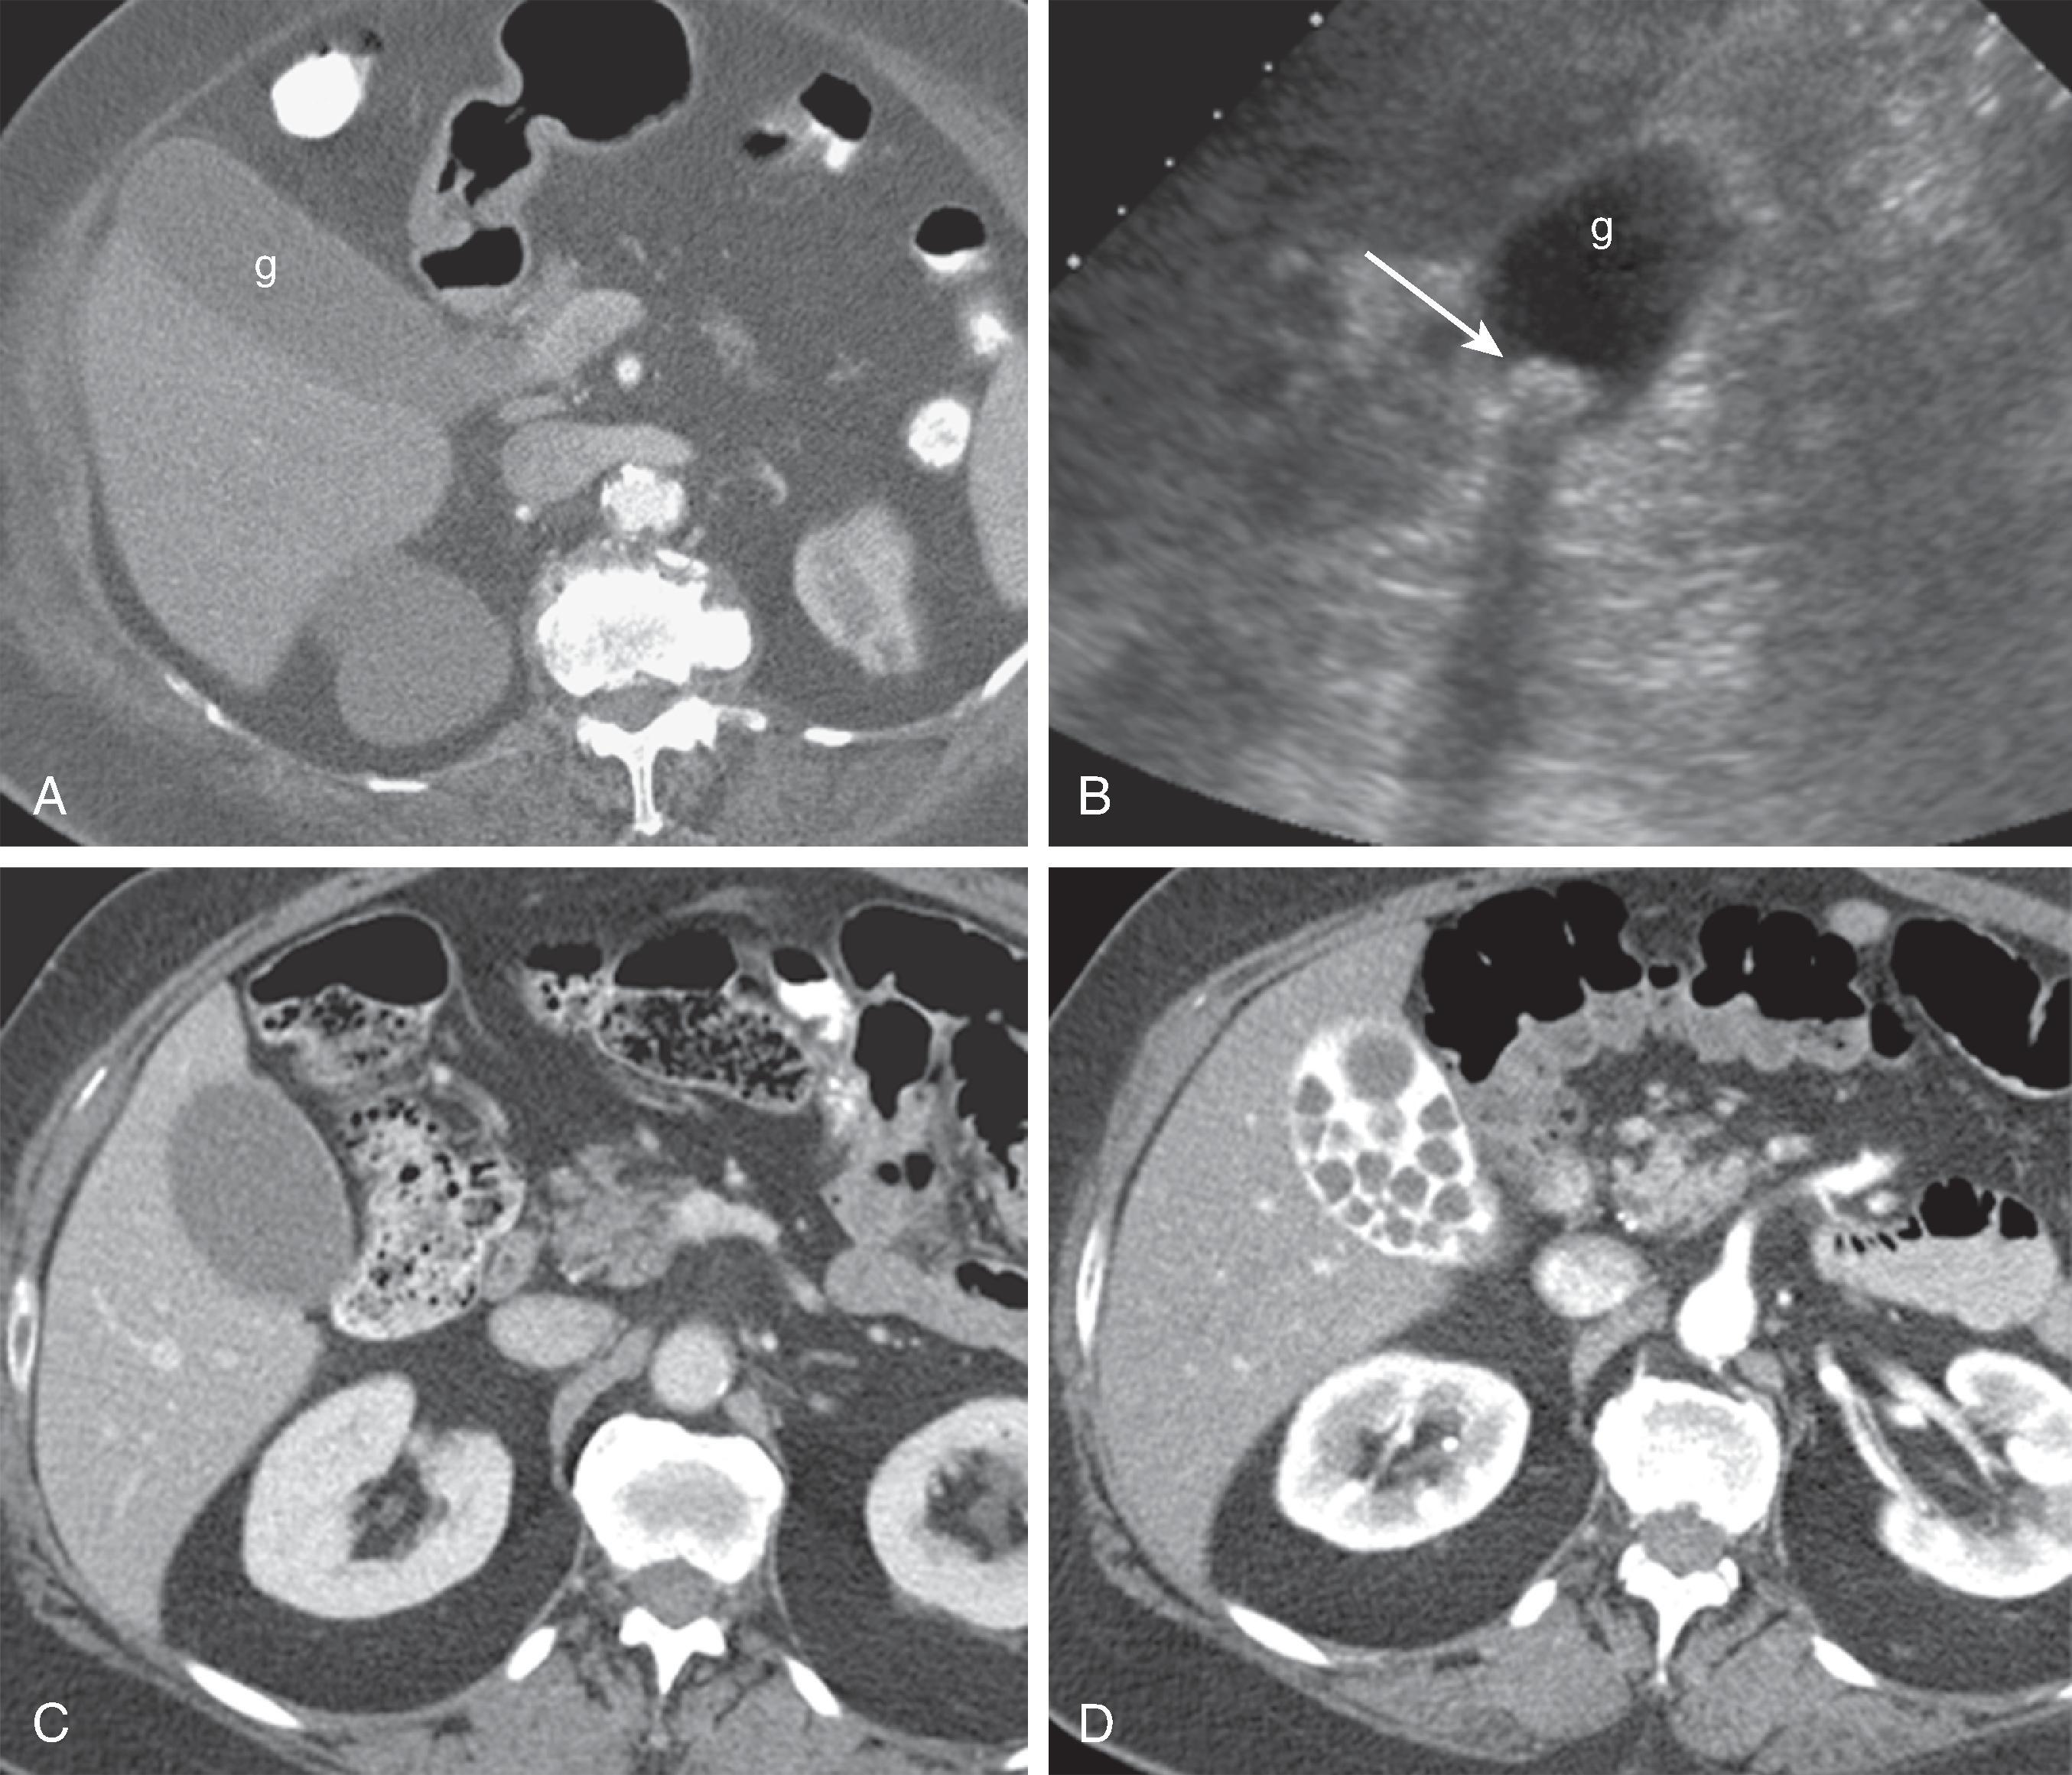 Fig. 49.7, Noncalcified gallstones not visualized at computed tomography (CT). (A) CT scan demonstrates no stones in the gallbladder (g) . (B) Ultrasound performed immediately after CT demonstrates shadowing stone (arrow) in the gallbladder (g) lumen. (C) CT scan in a different patient demonstrates no stones in the gallbladder. (D) CT performed several days later in the same patient now demonstrates multiple stones in the gallbladder because of vicarious excretion of previously administered intravenous contrast material in the gallbladder.